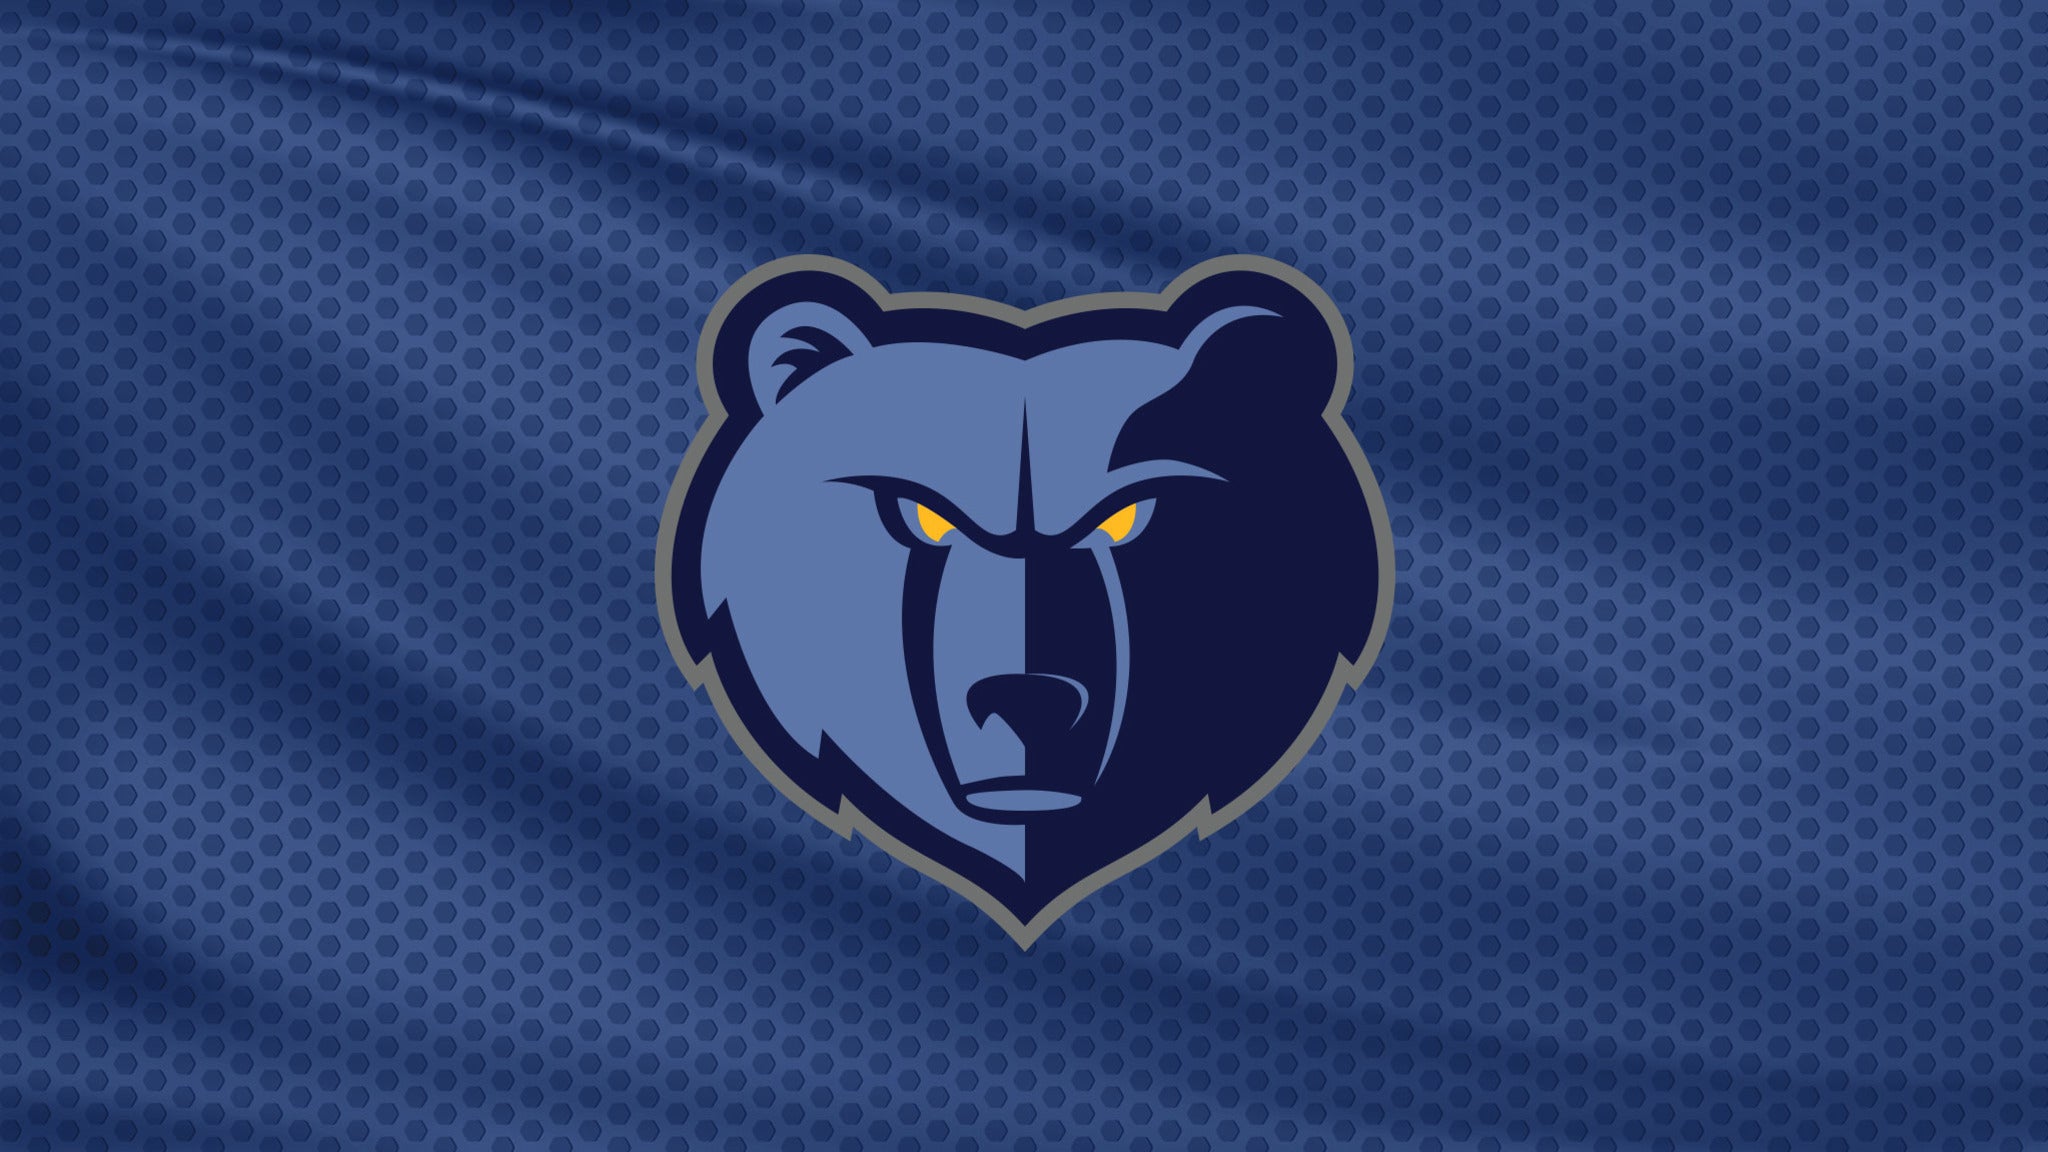 members only presale password for West Conf Qtrs: TBA at Grizzlies Rd 1 Hm Gm 1 presale tickets in Memphis